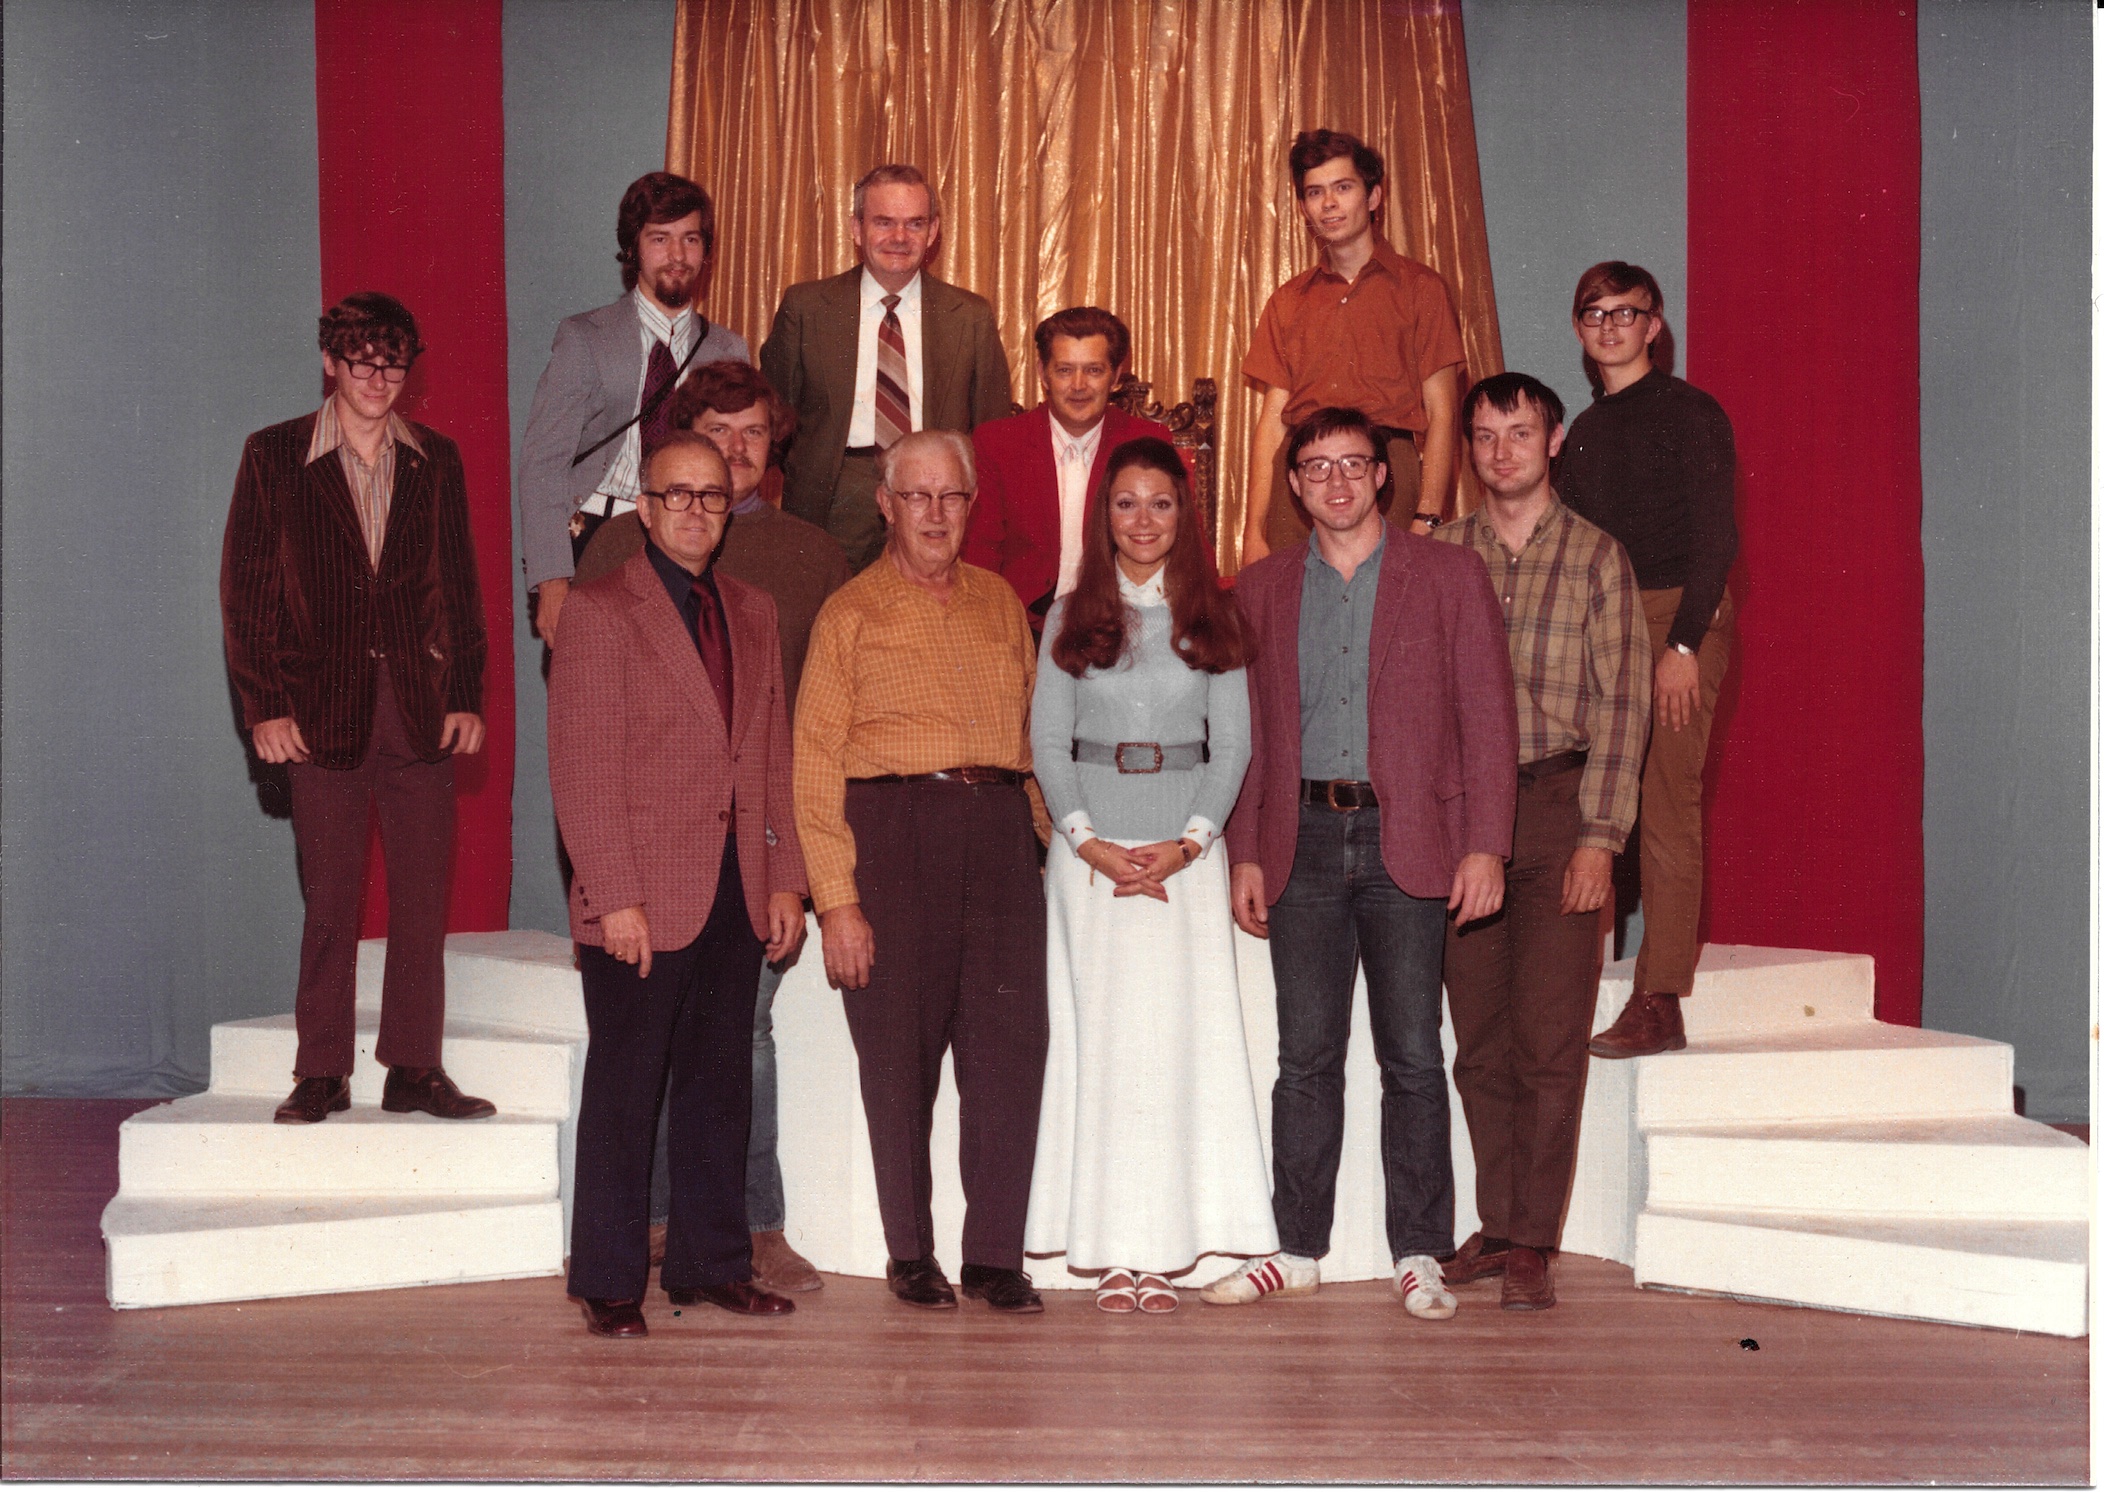 Miss Wis stage crew, 1974